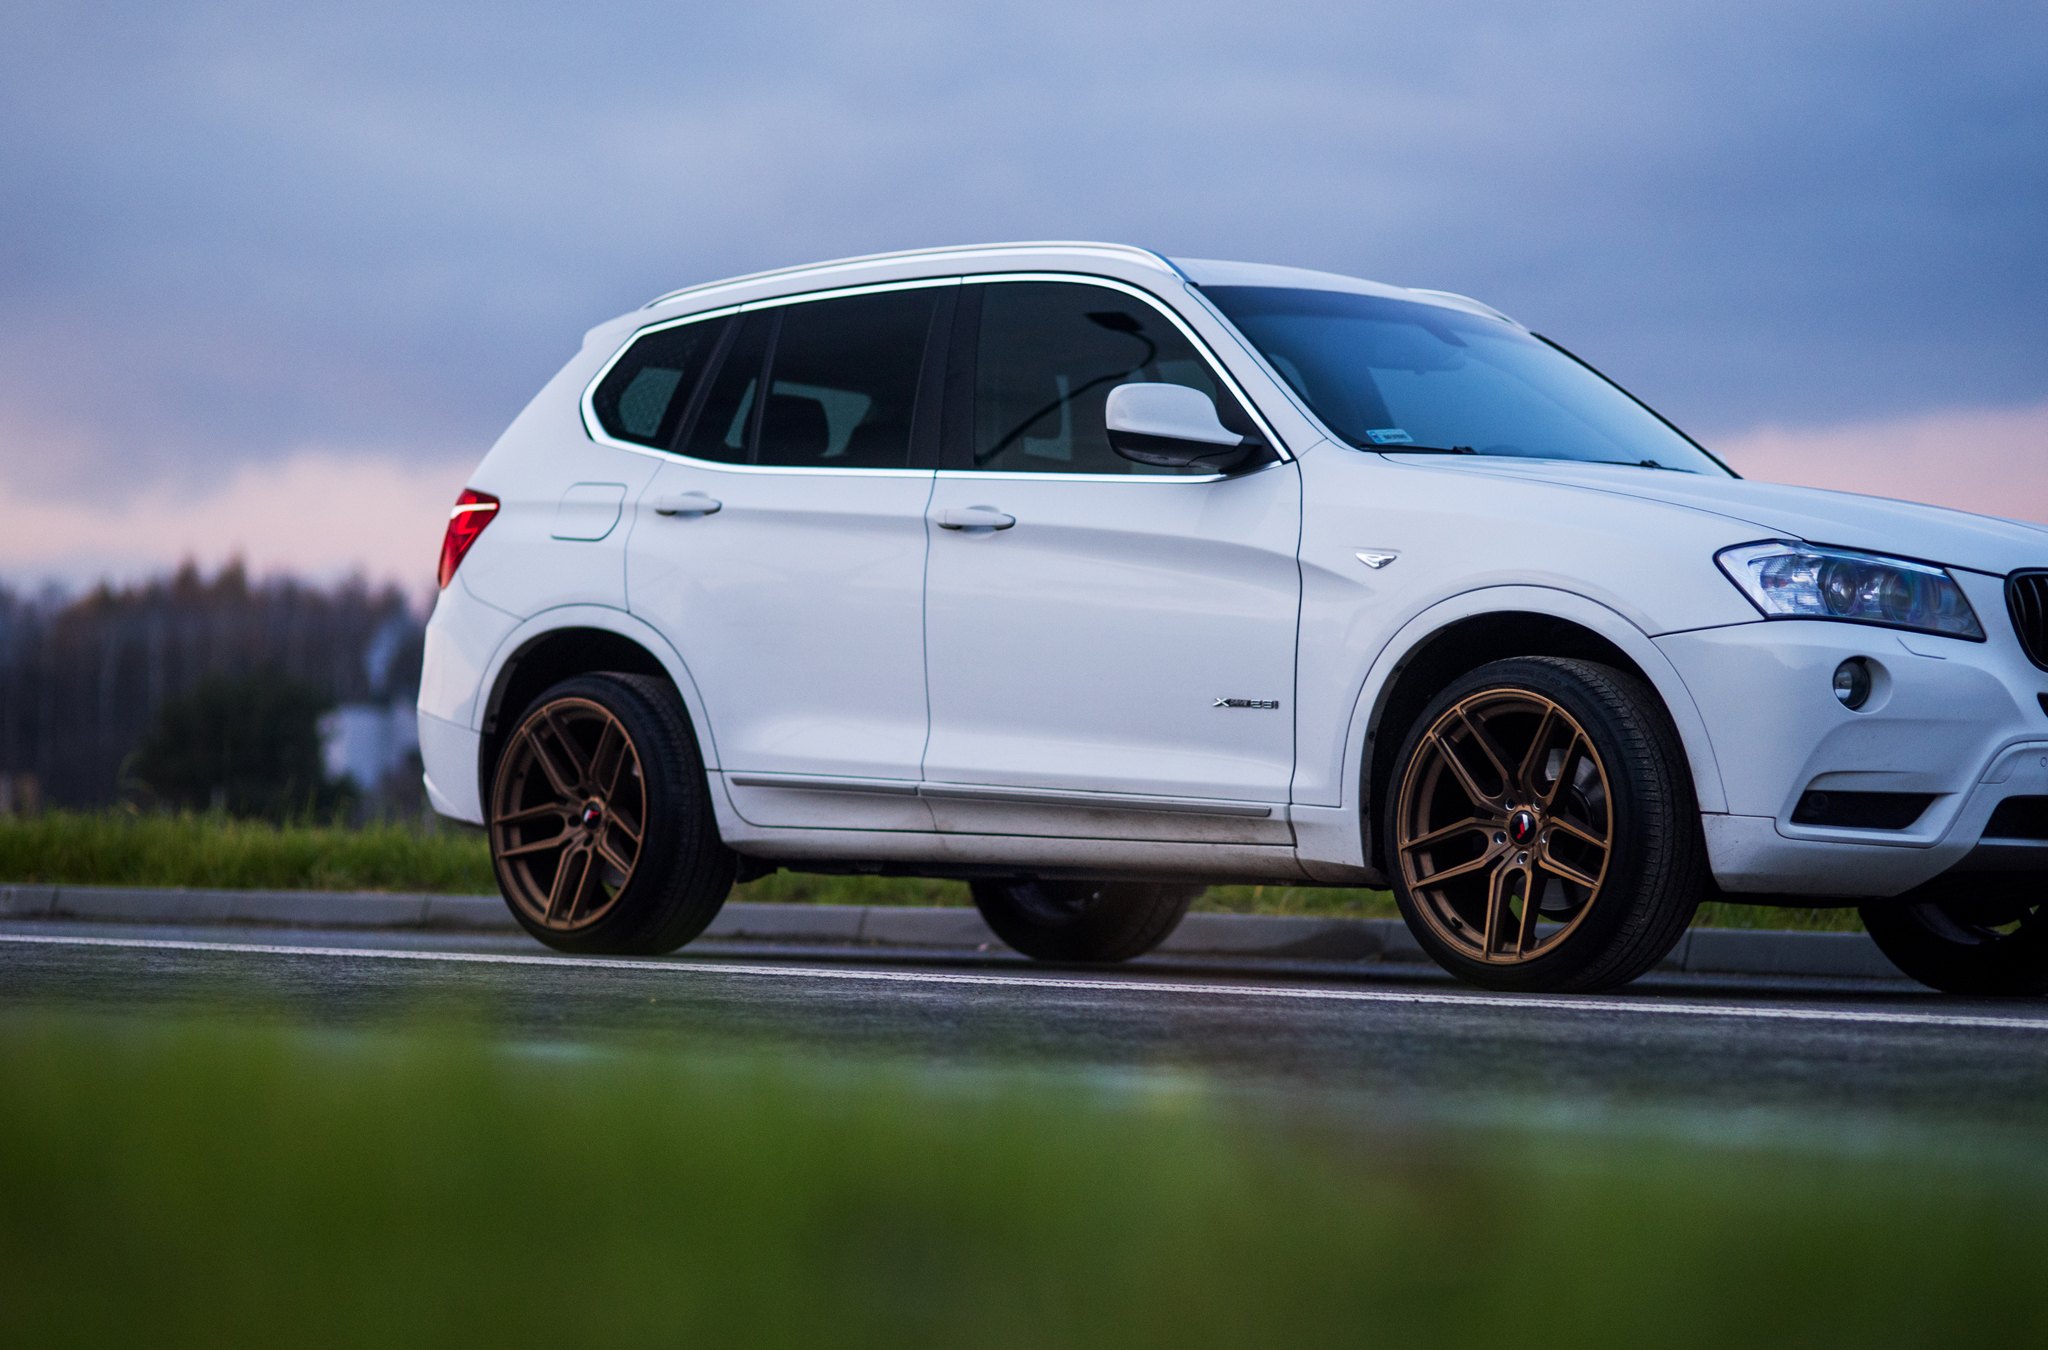 Aftermarket Accessories on White BMW X3 Create a Nice ...